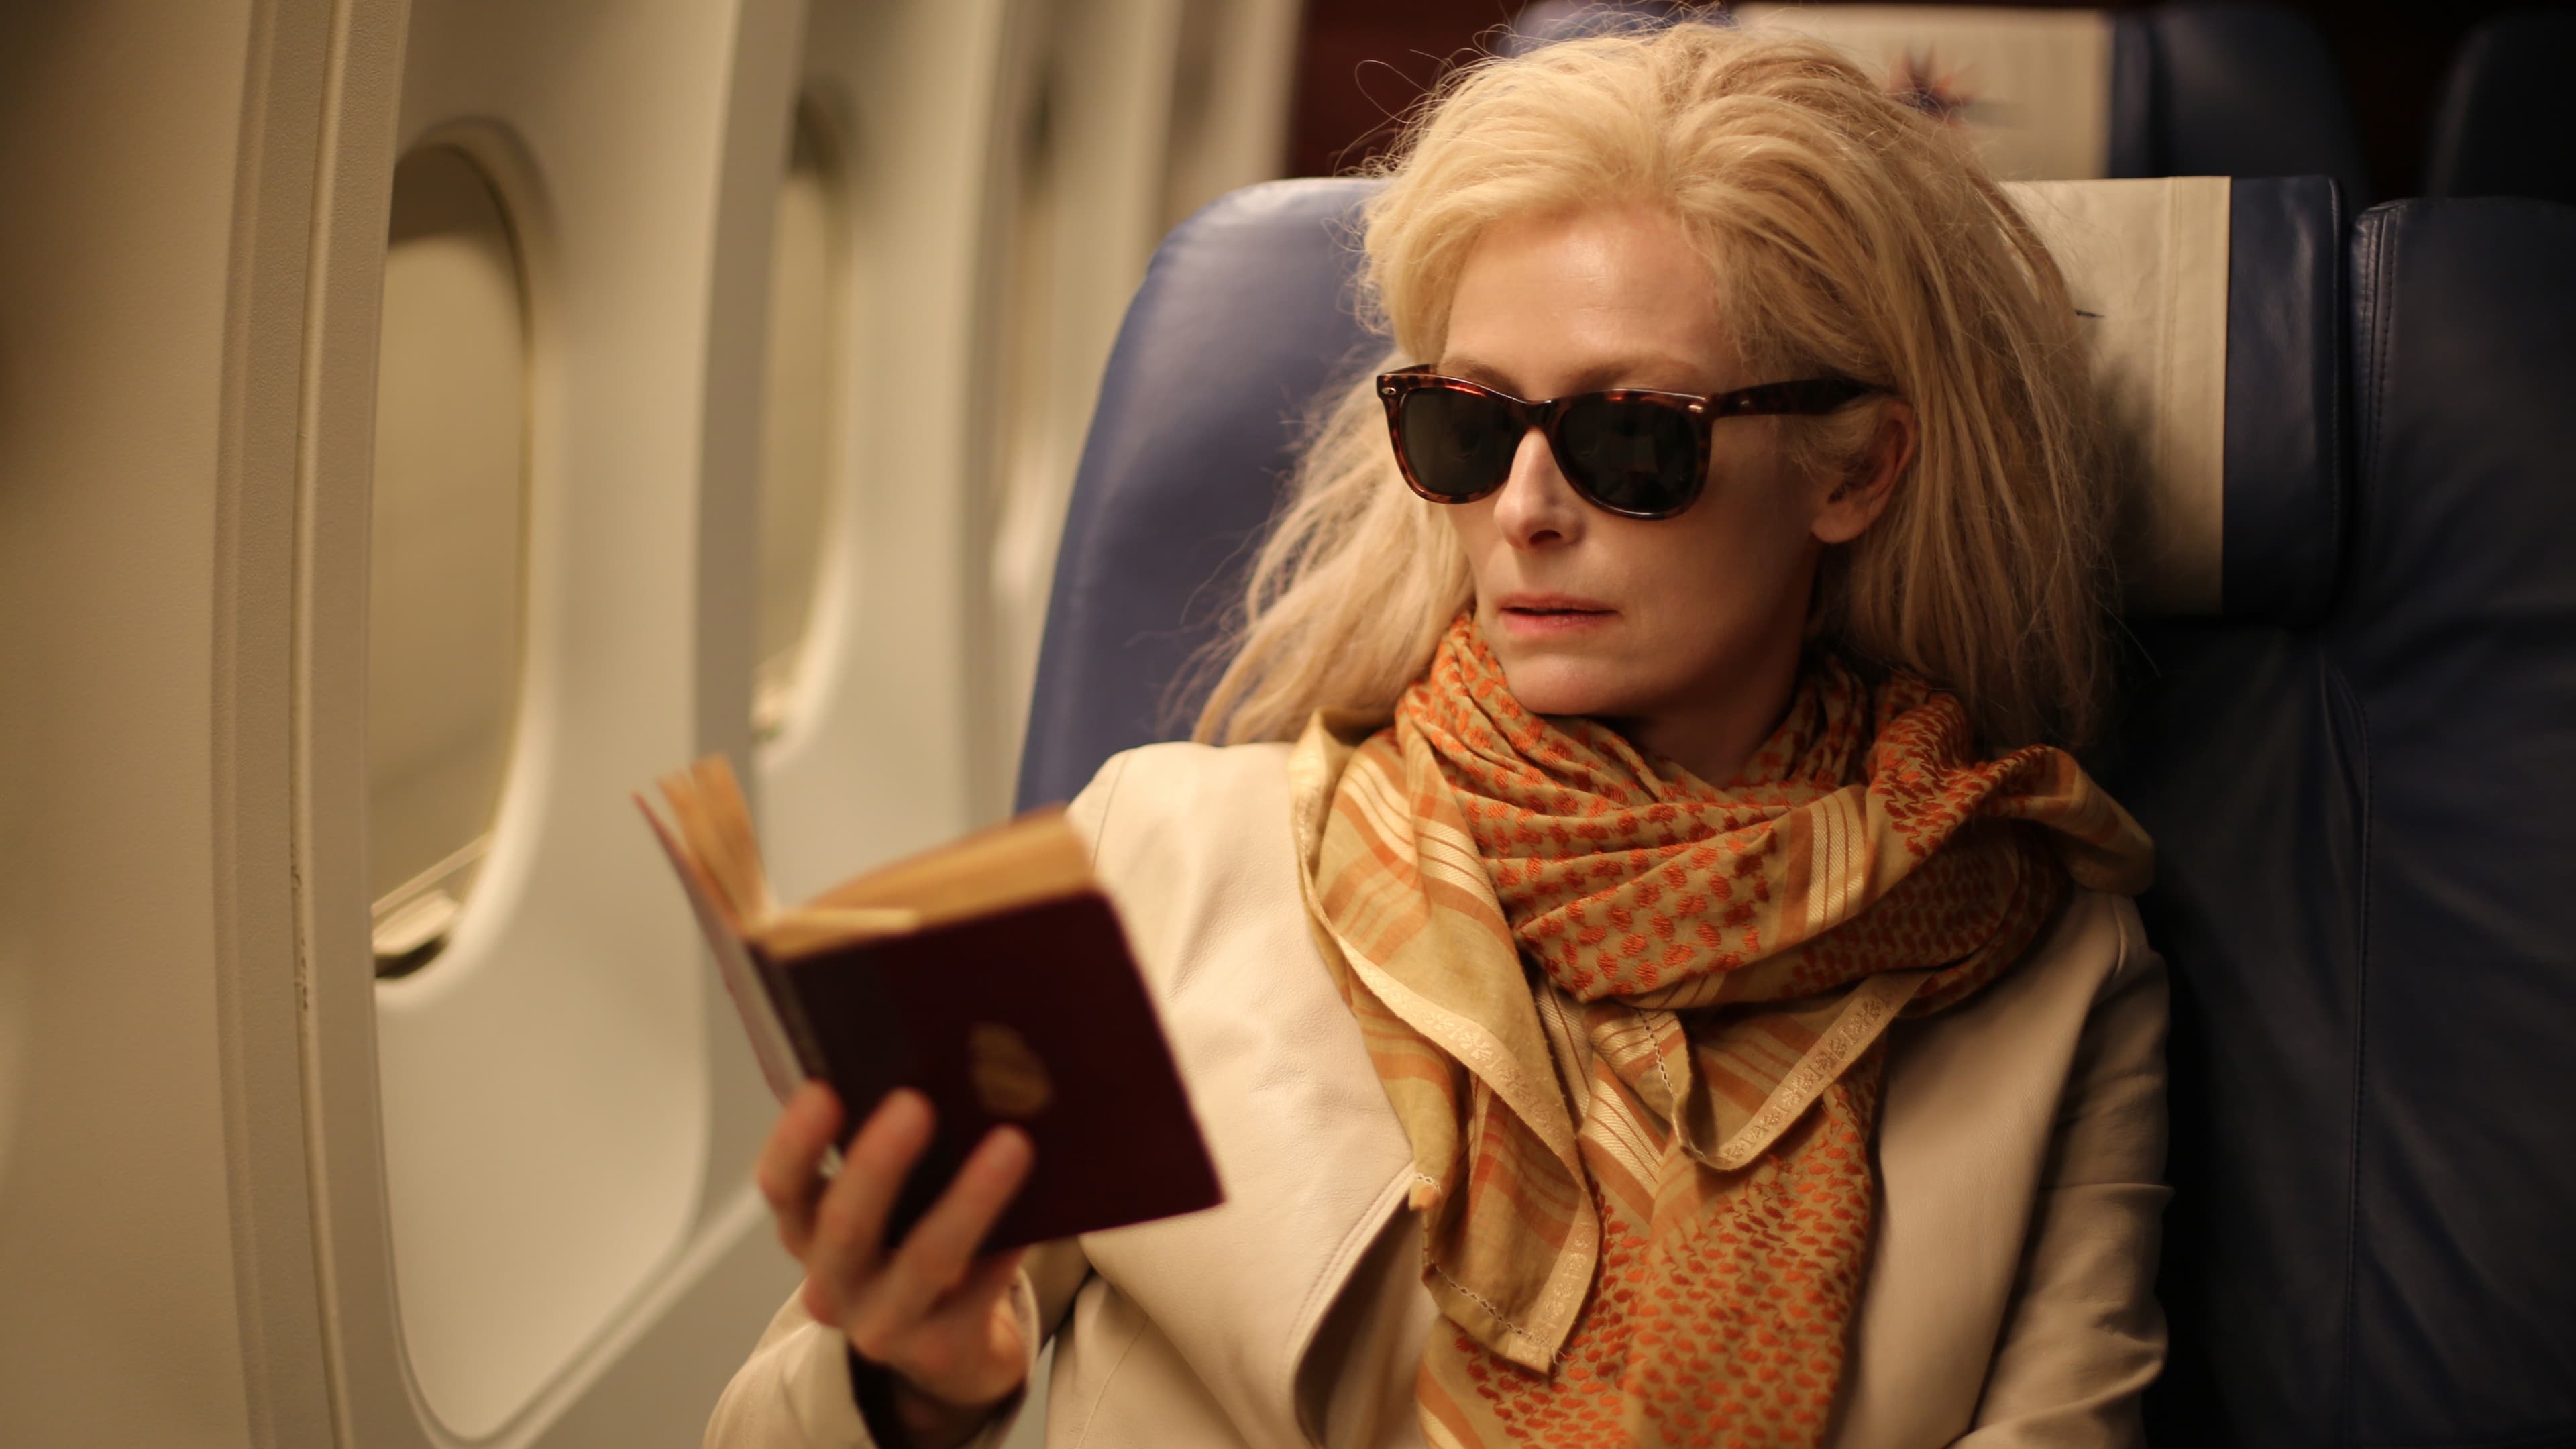 Only Lovers Left Alive, Watch dubbed movies, Online movie streaming, 2013 film selection, 3840x2160 4K Desktop